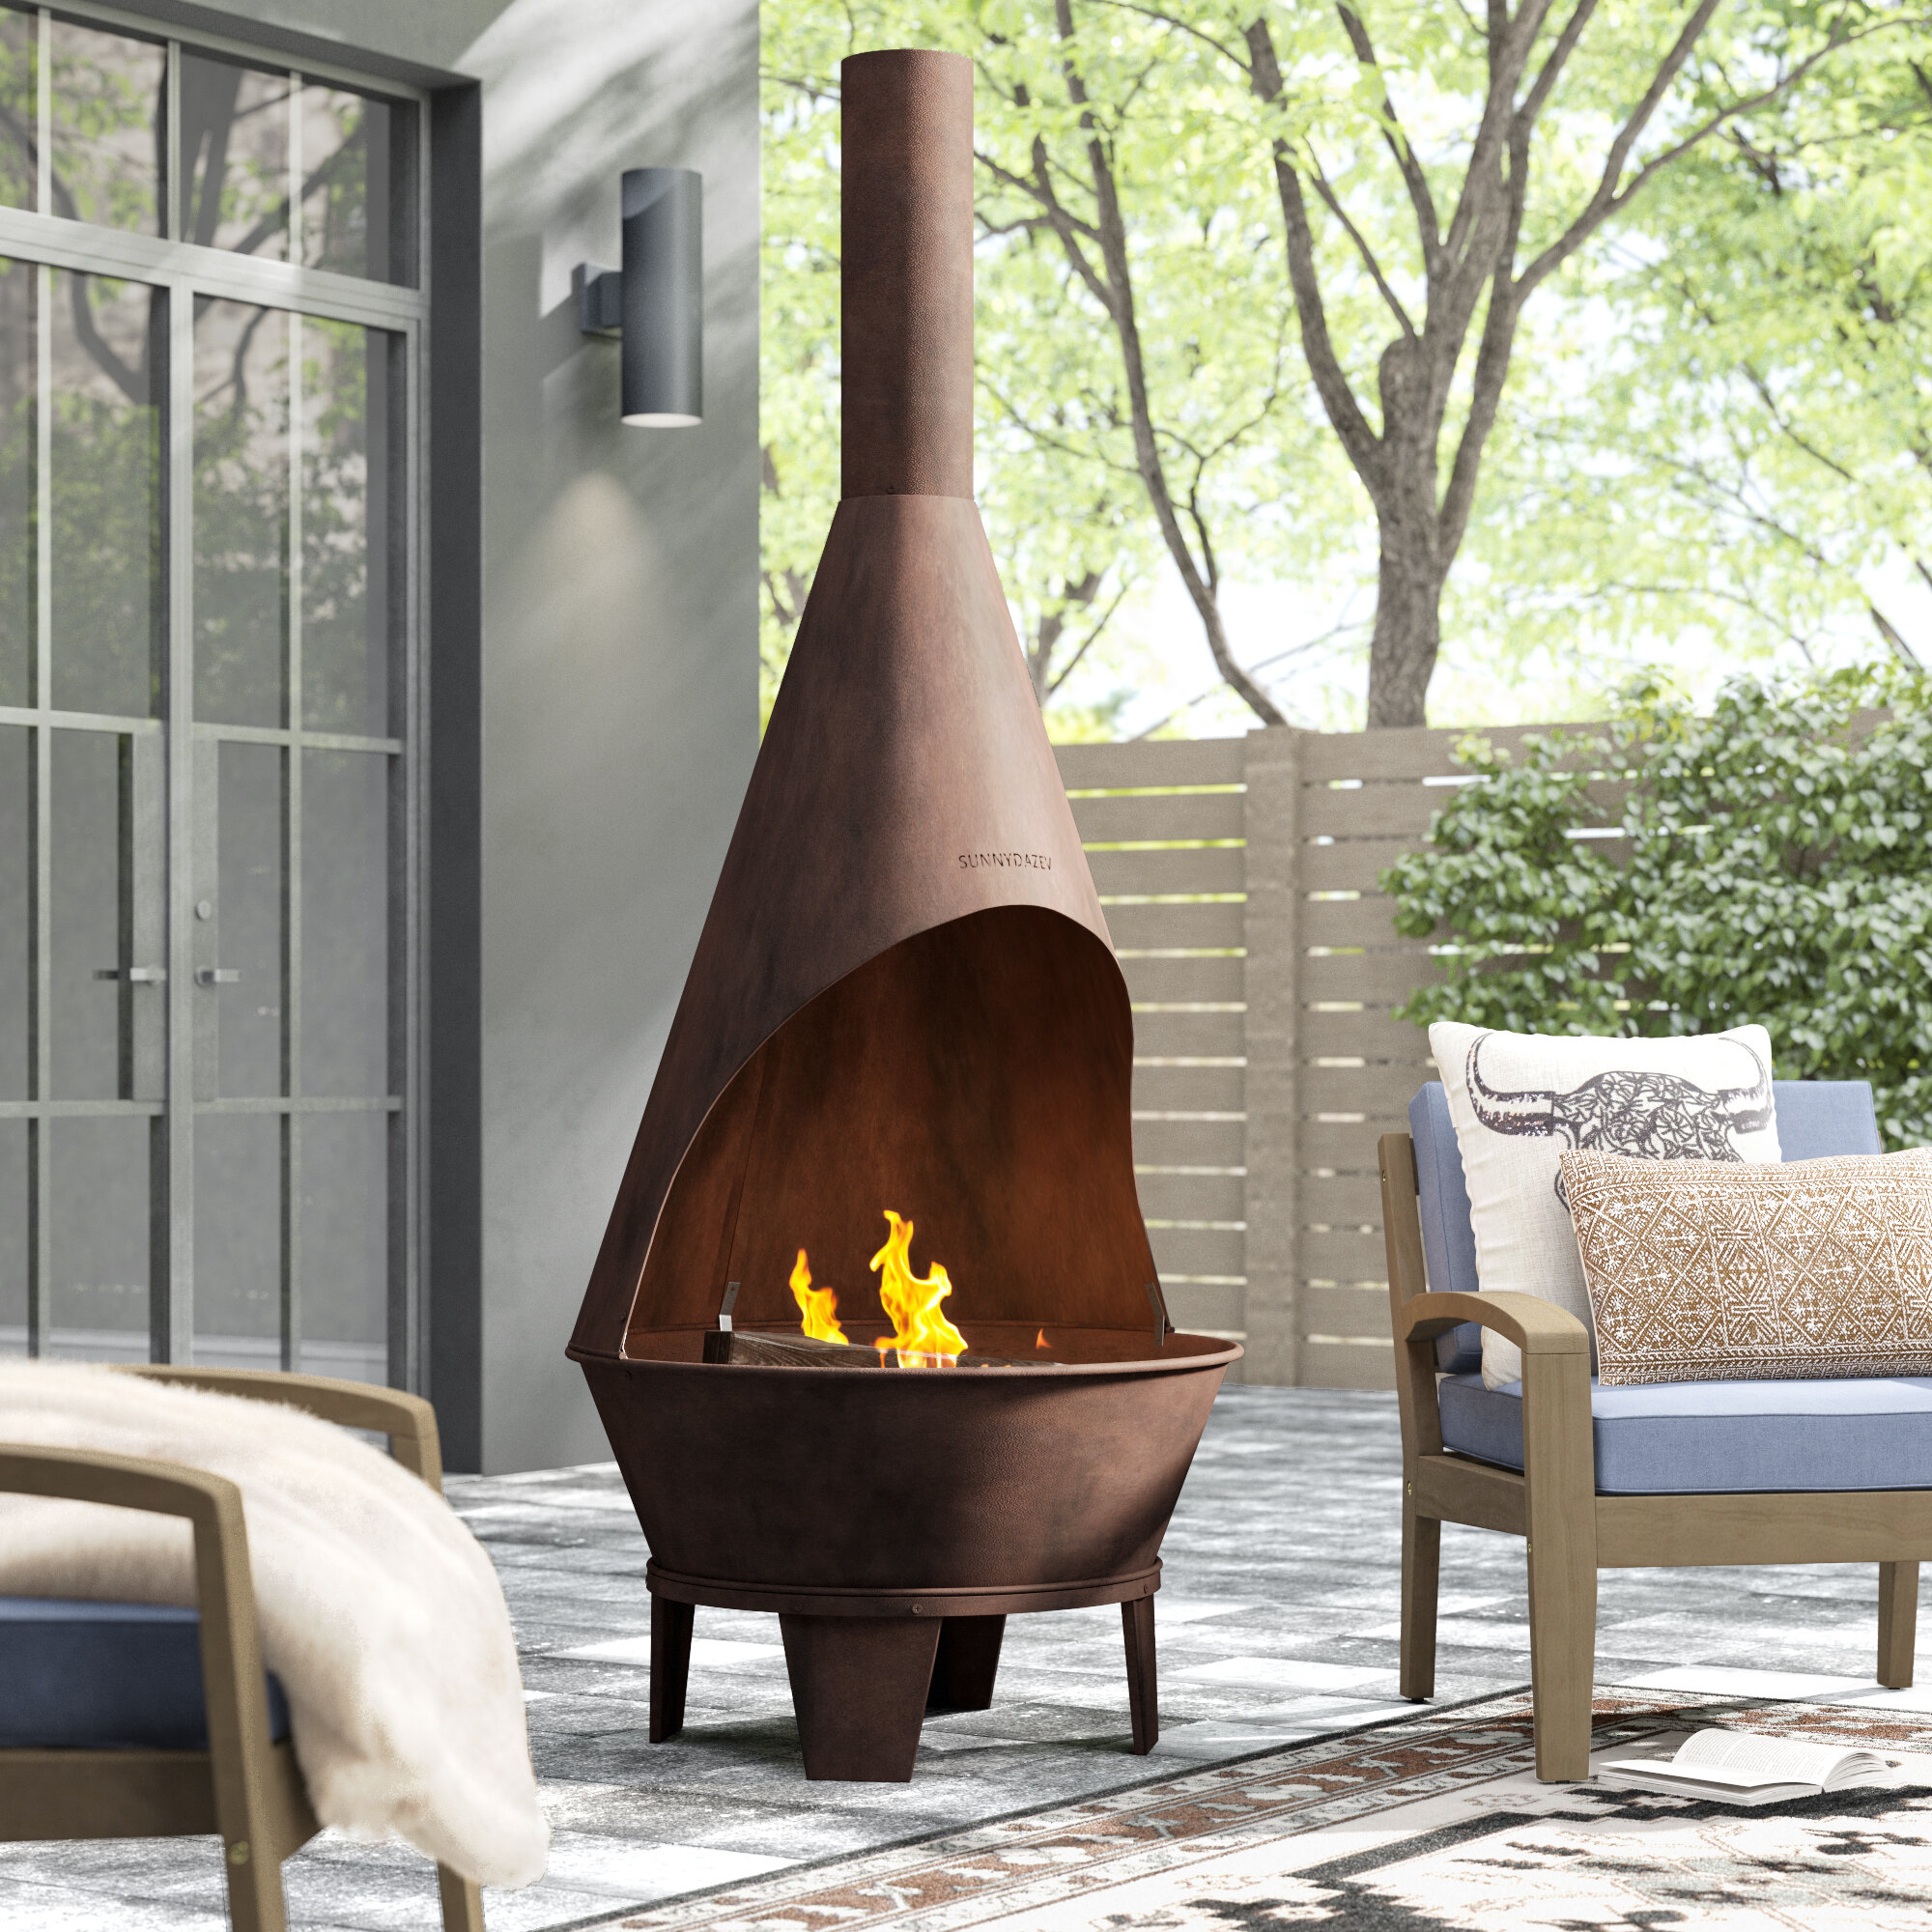 Details about   Outdoor Burning Chiminea Fire Pit Fireplace Heater Backyard Lounge Patio Heat 